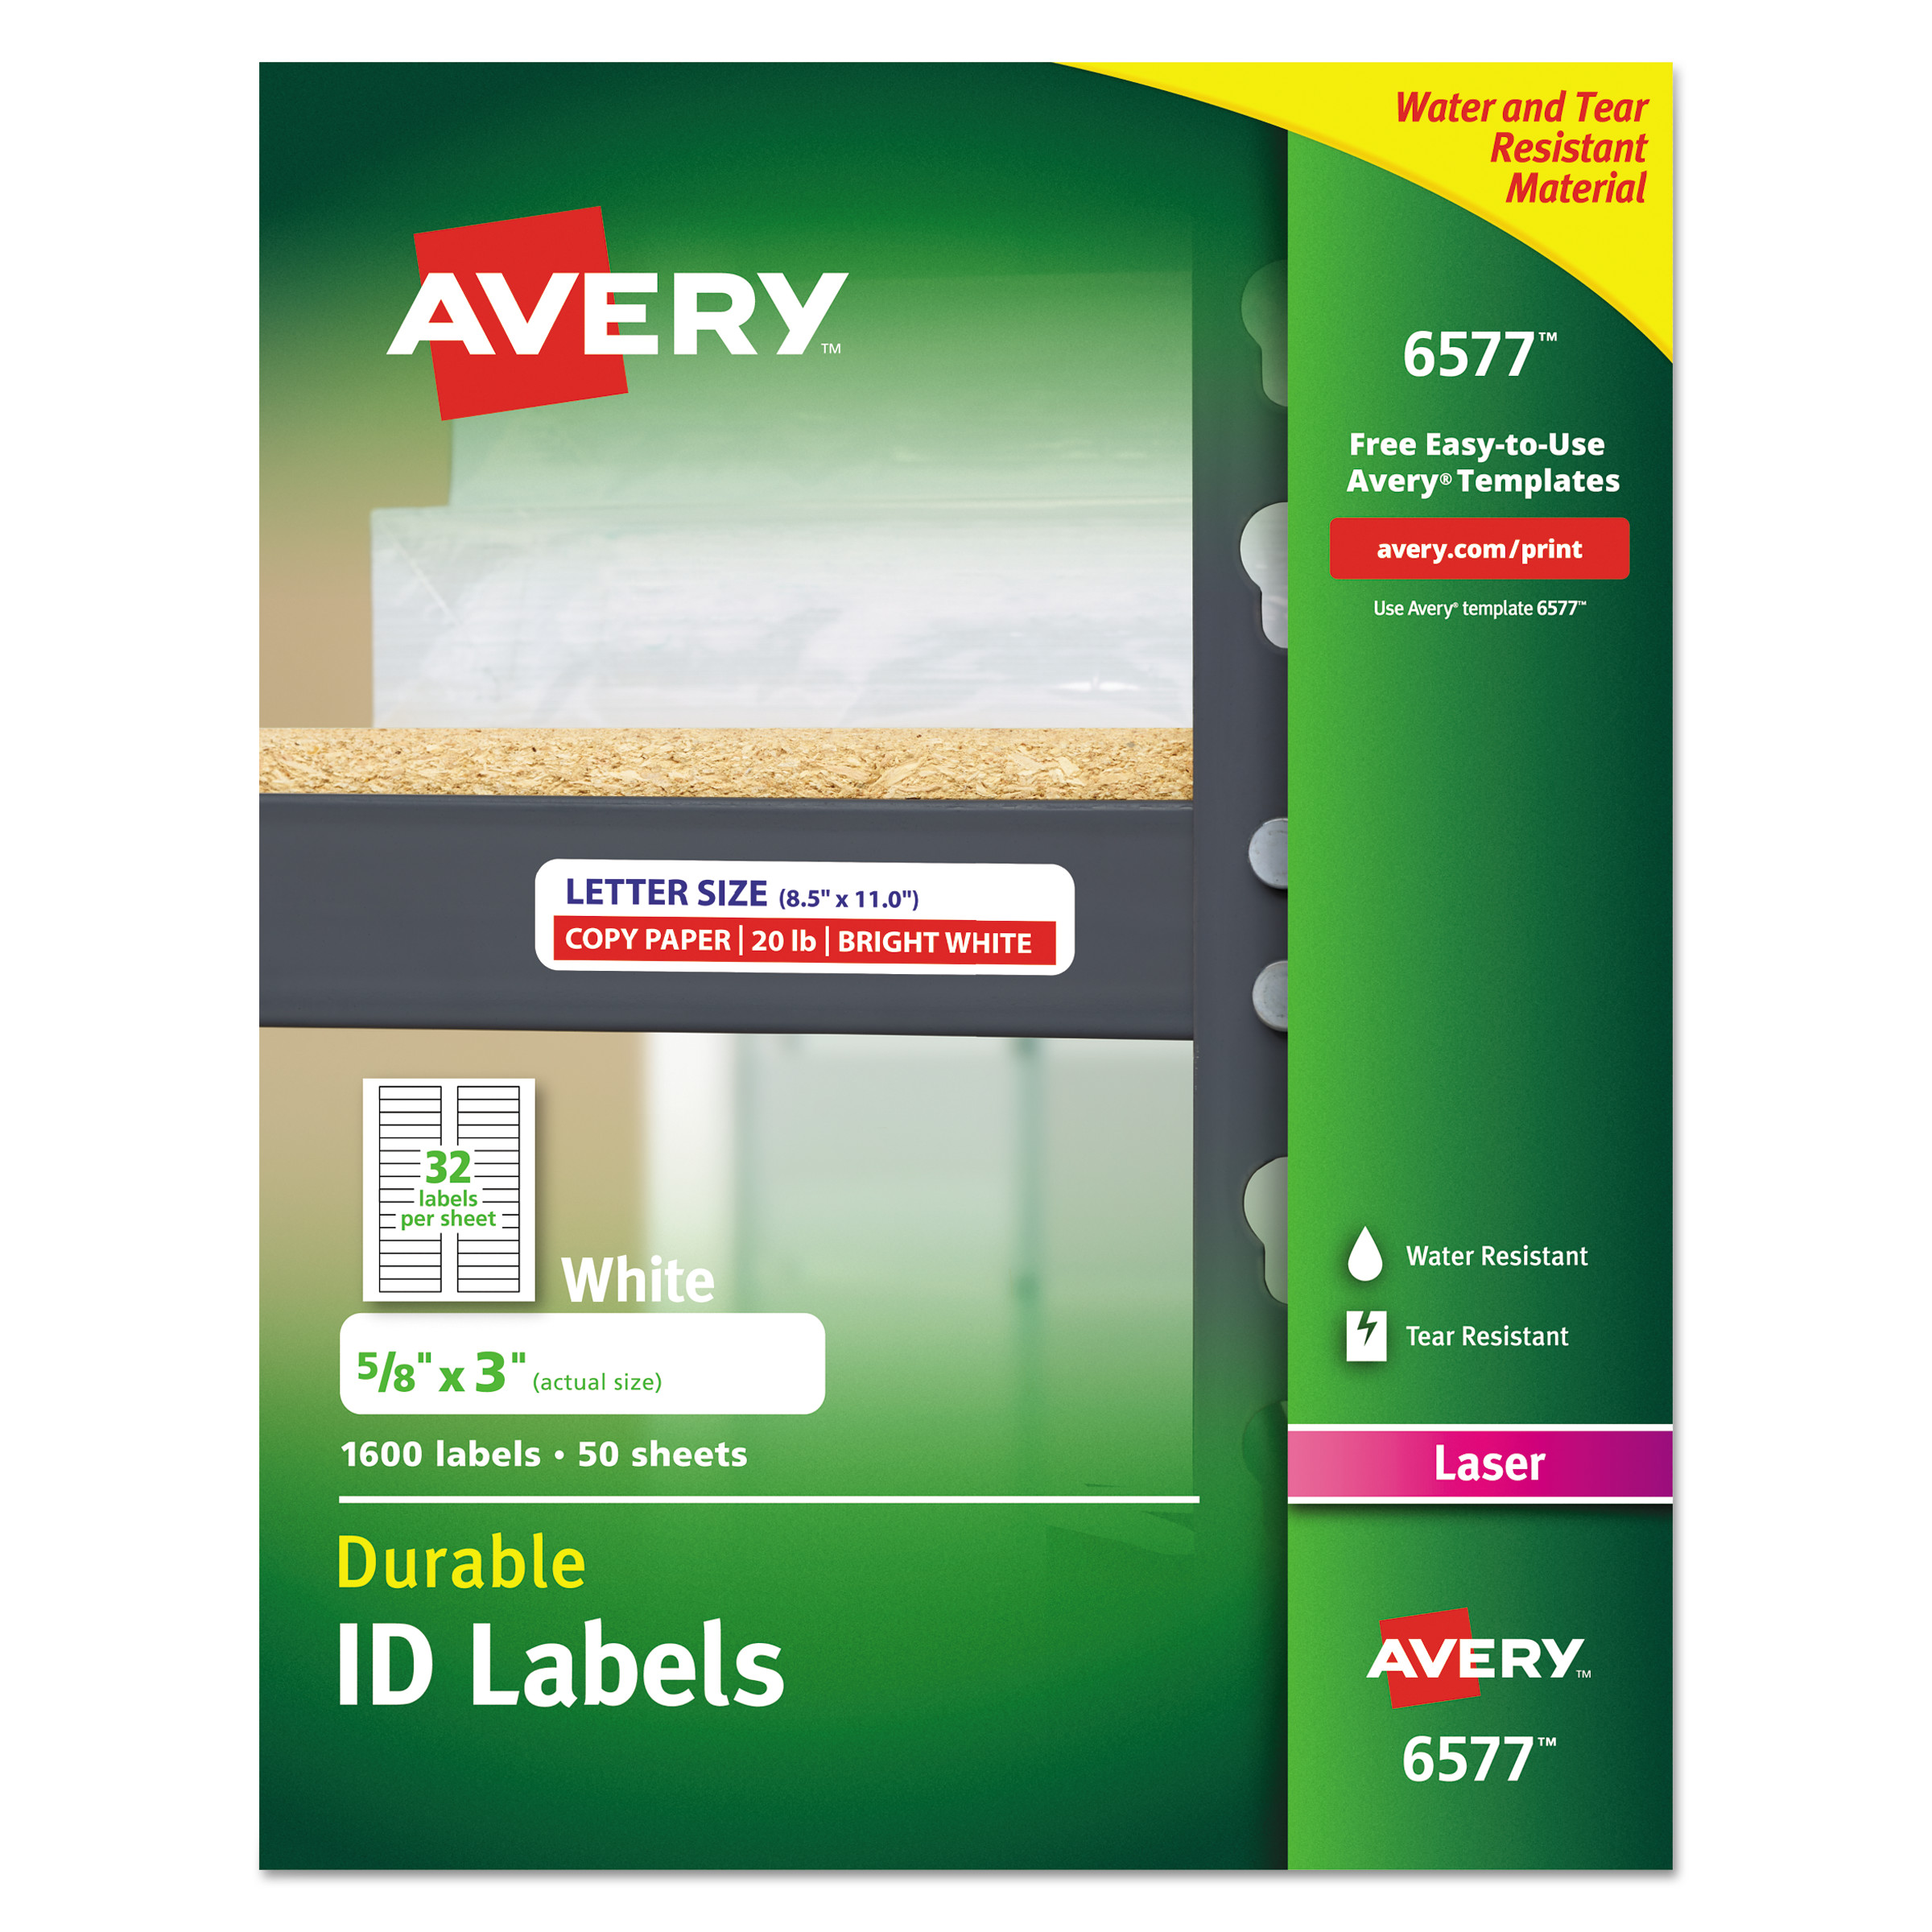  Avery 06577 Durable Permanent ID Labels with TrueBlock Technology, Laser Printers, 0.63 x 3, White, 32/Sheet, 50 Sheets/Pack (AVE6577) 